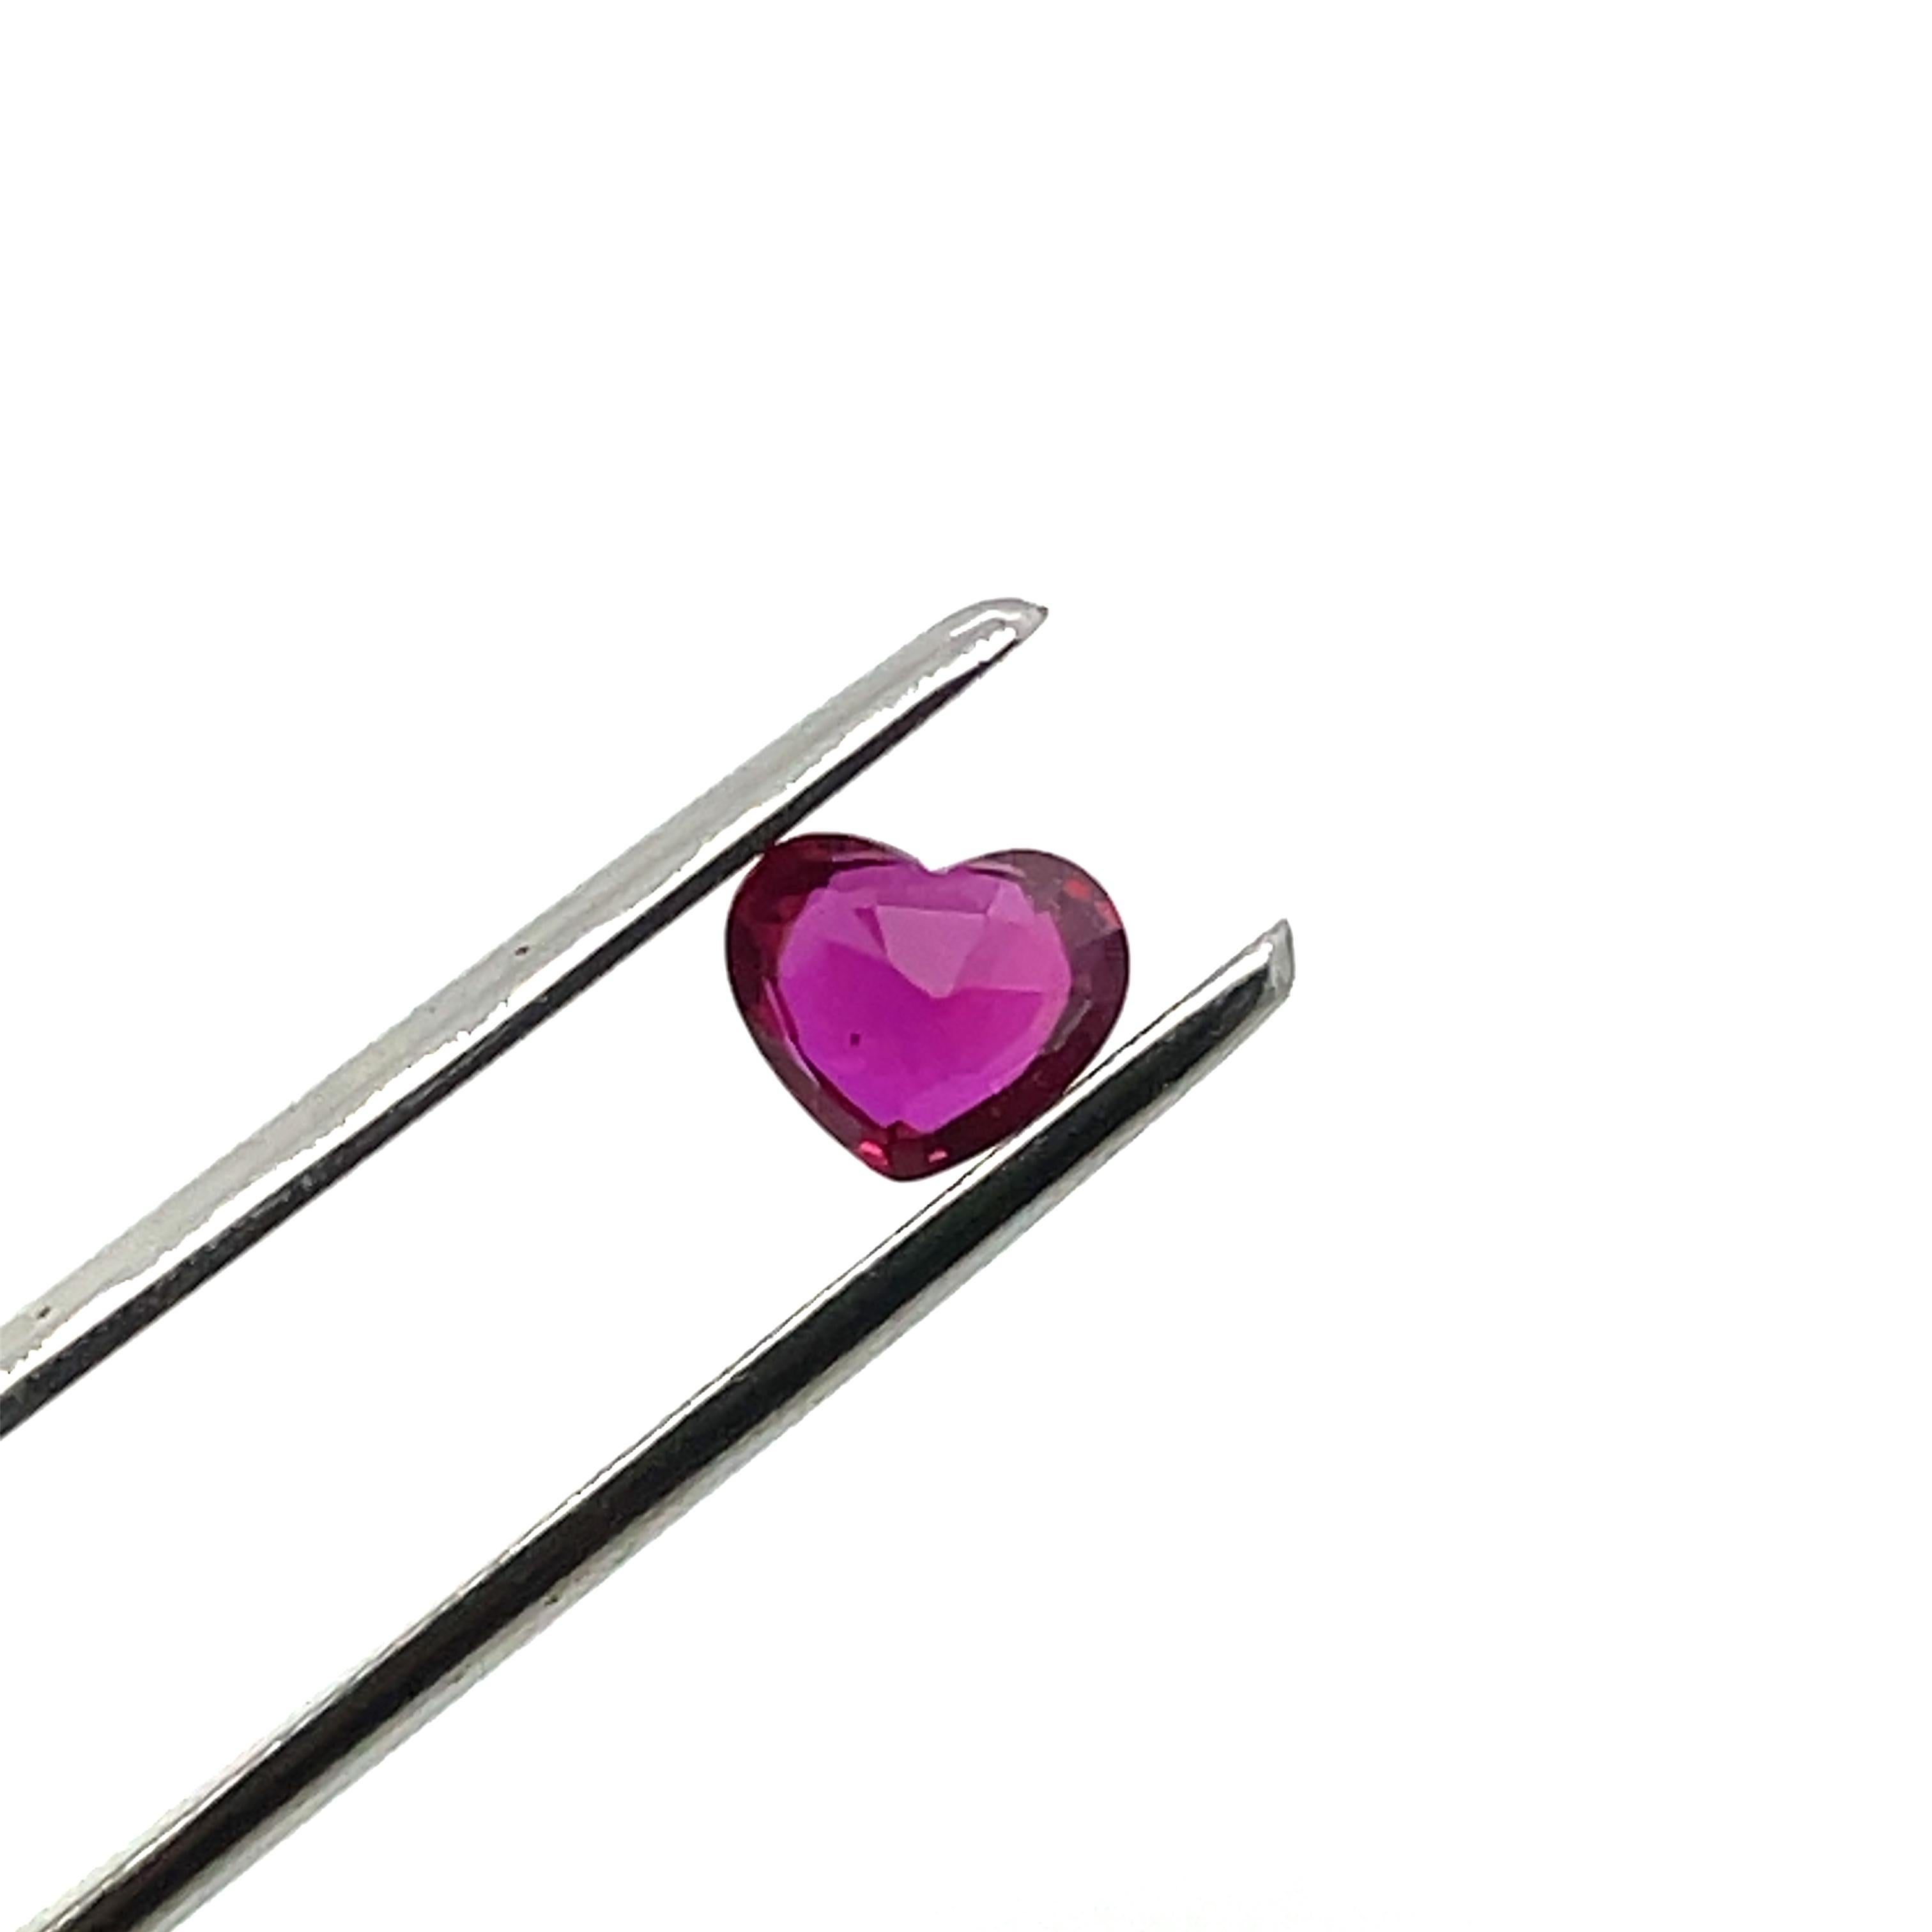 Heart Cut Heart-Shaped Ruby Cts 1.27 For Sale